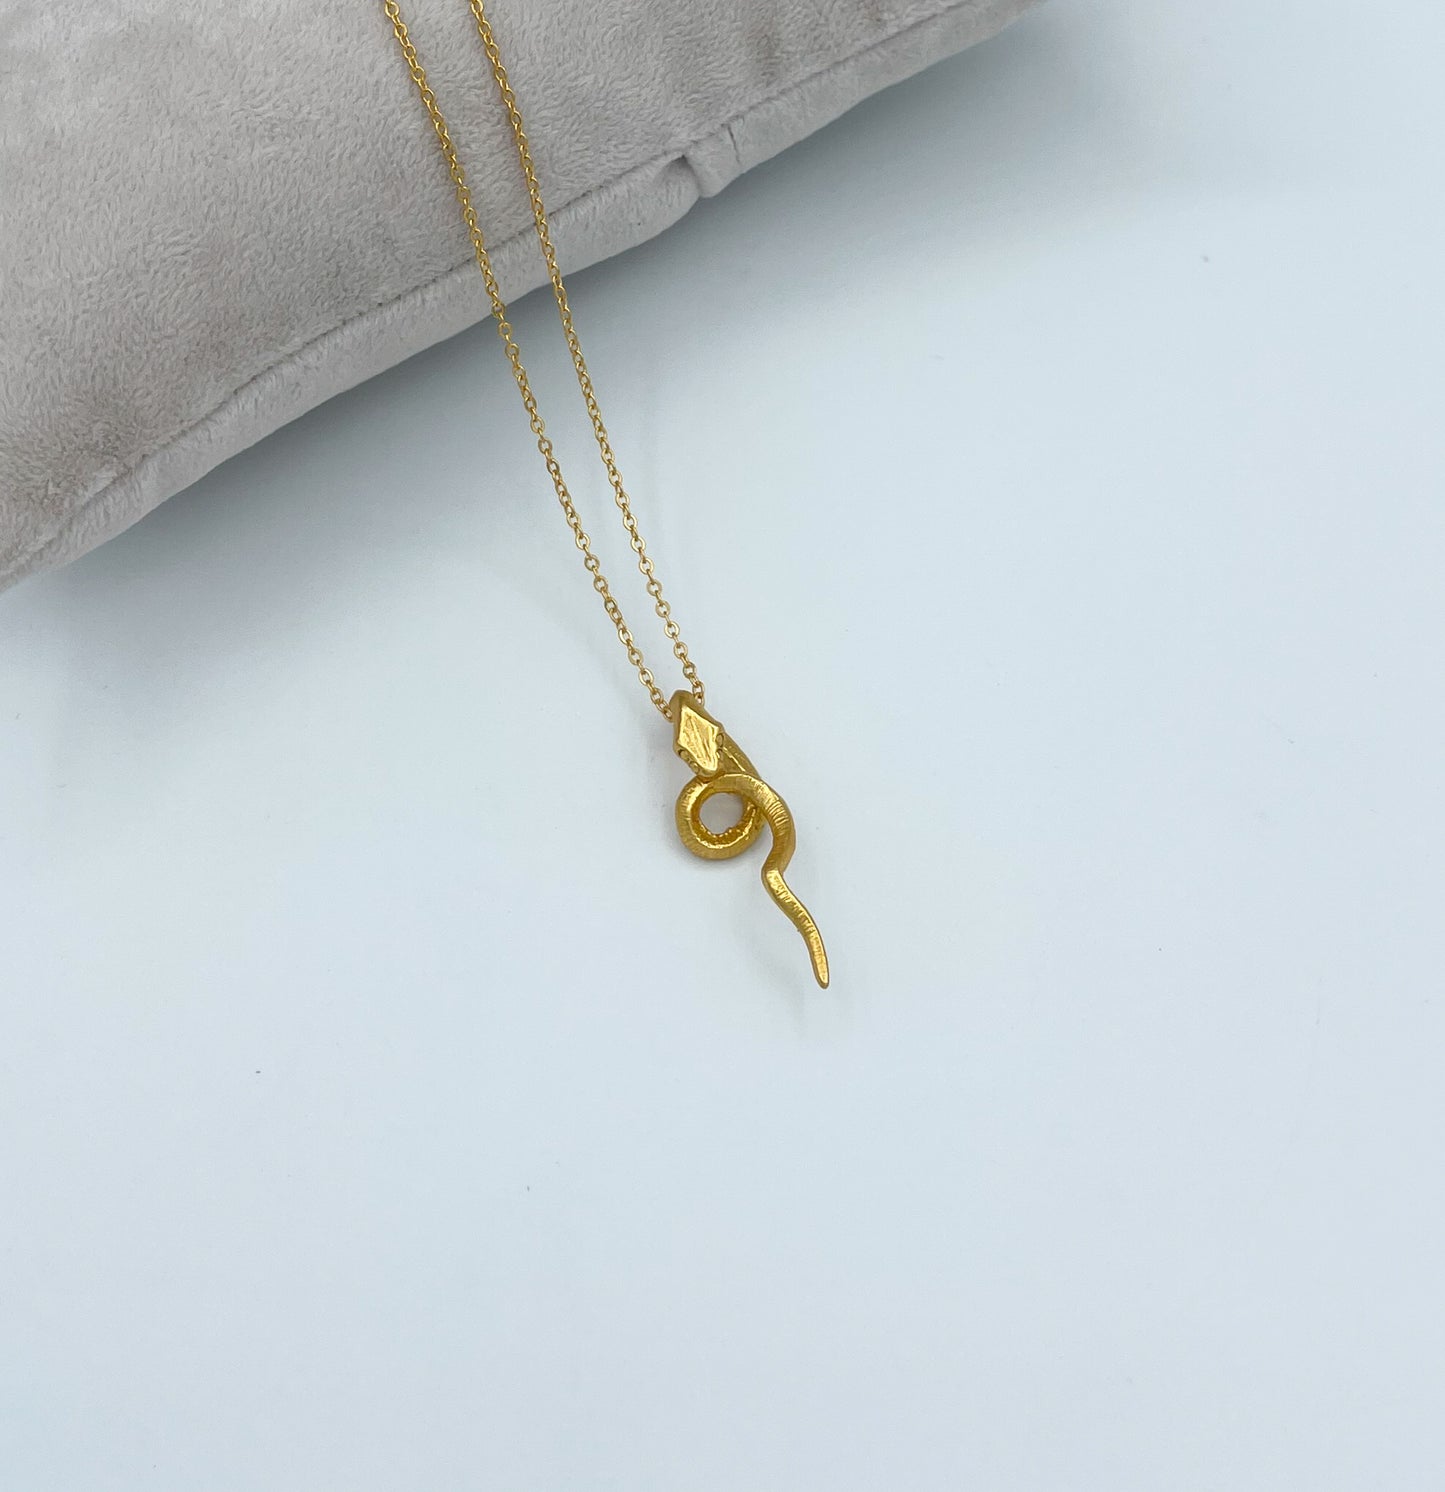 Gold plated snake pendant necklace